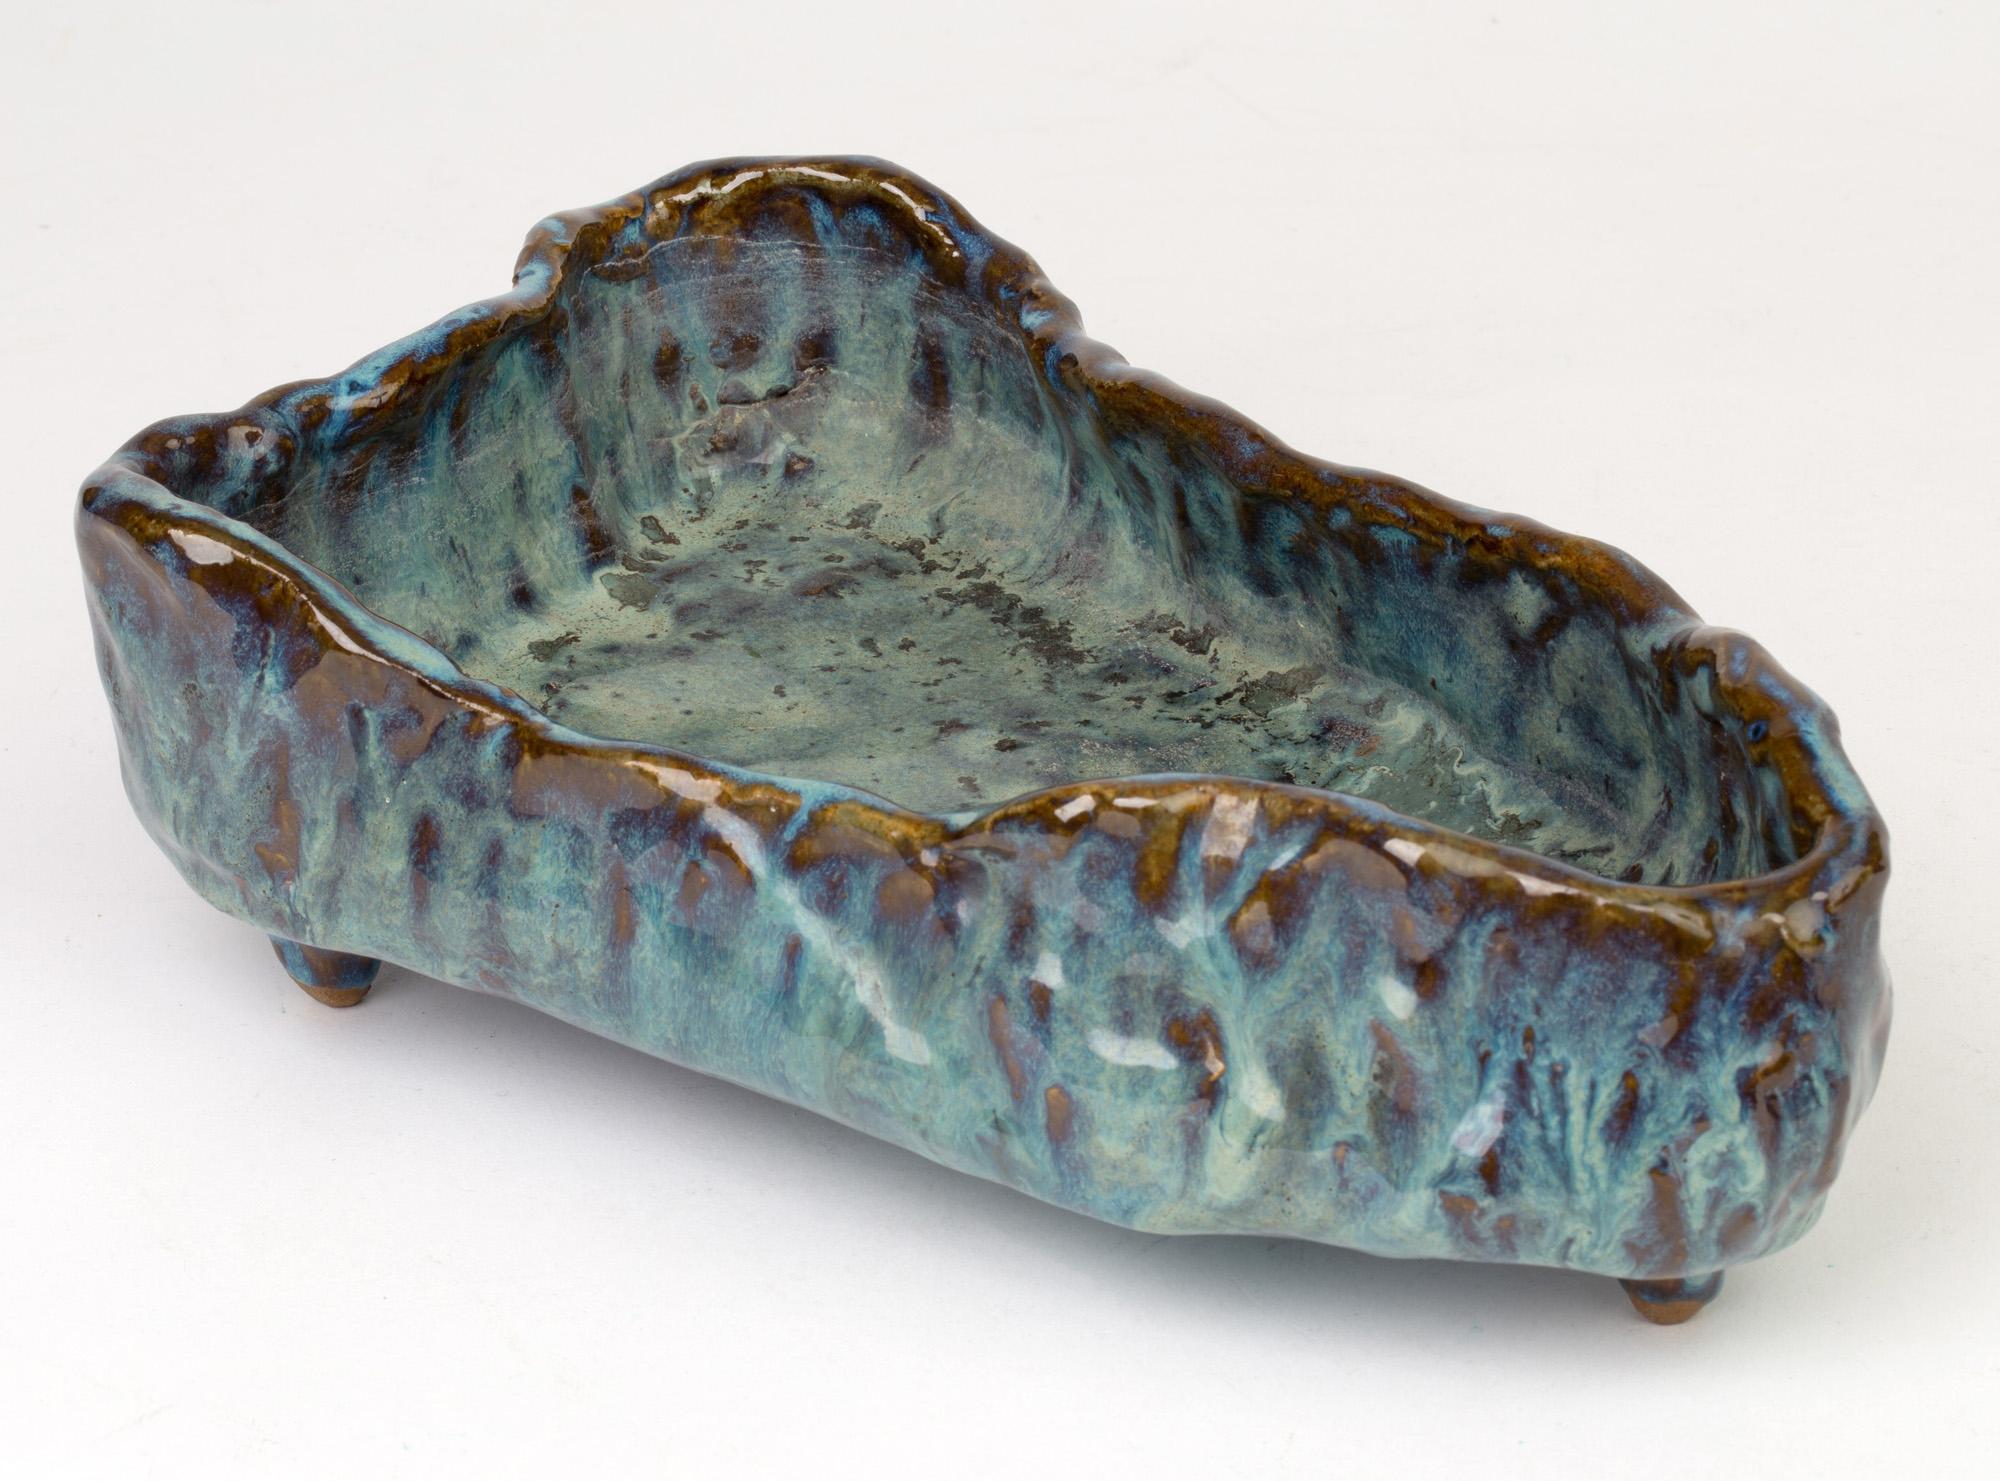 A stylish Brutalist sculptural form Studio Pottery open work bowl by Stephanie Kalan (1909-1978) probably dating 1953-1978. The bowl of elongated boat shape sits on a flat base and is formed in thick hand formed clay with a combed pattern natural